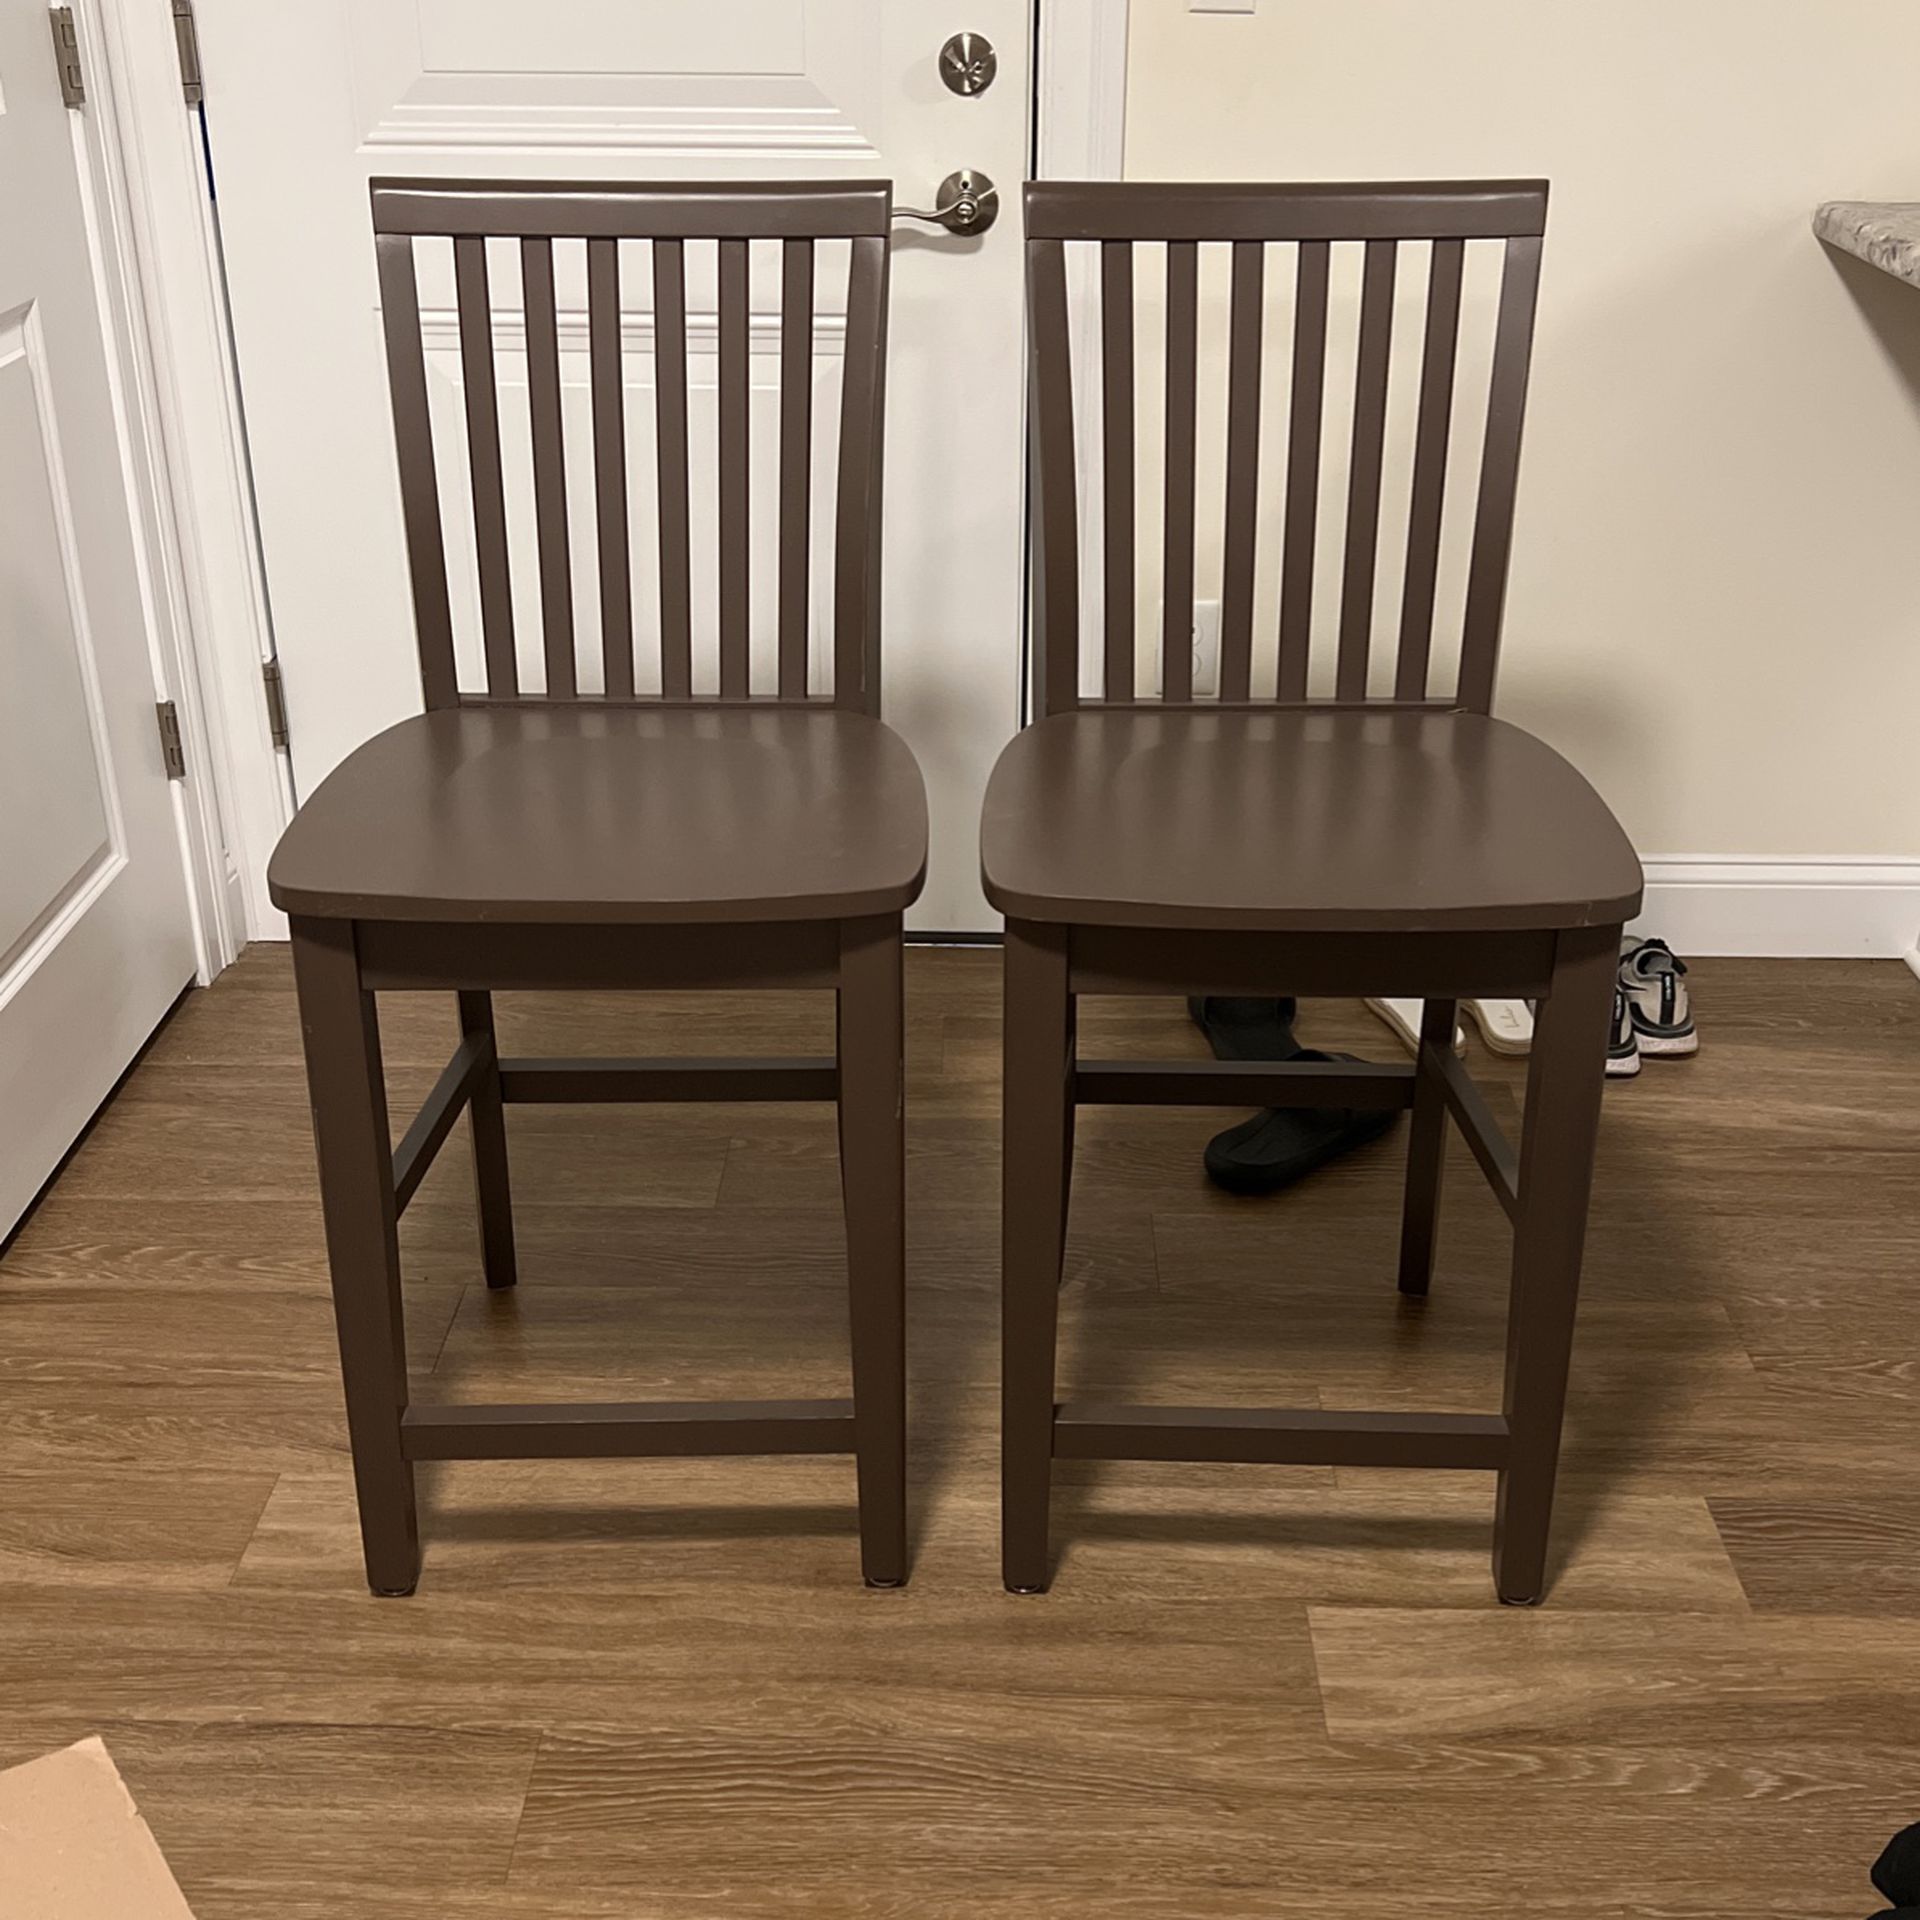 Two Tall Kitchen/dining Chairs 